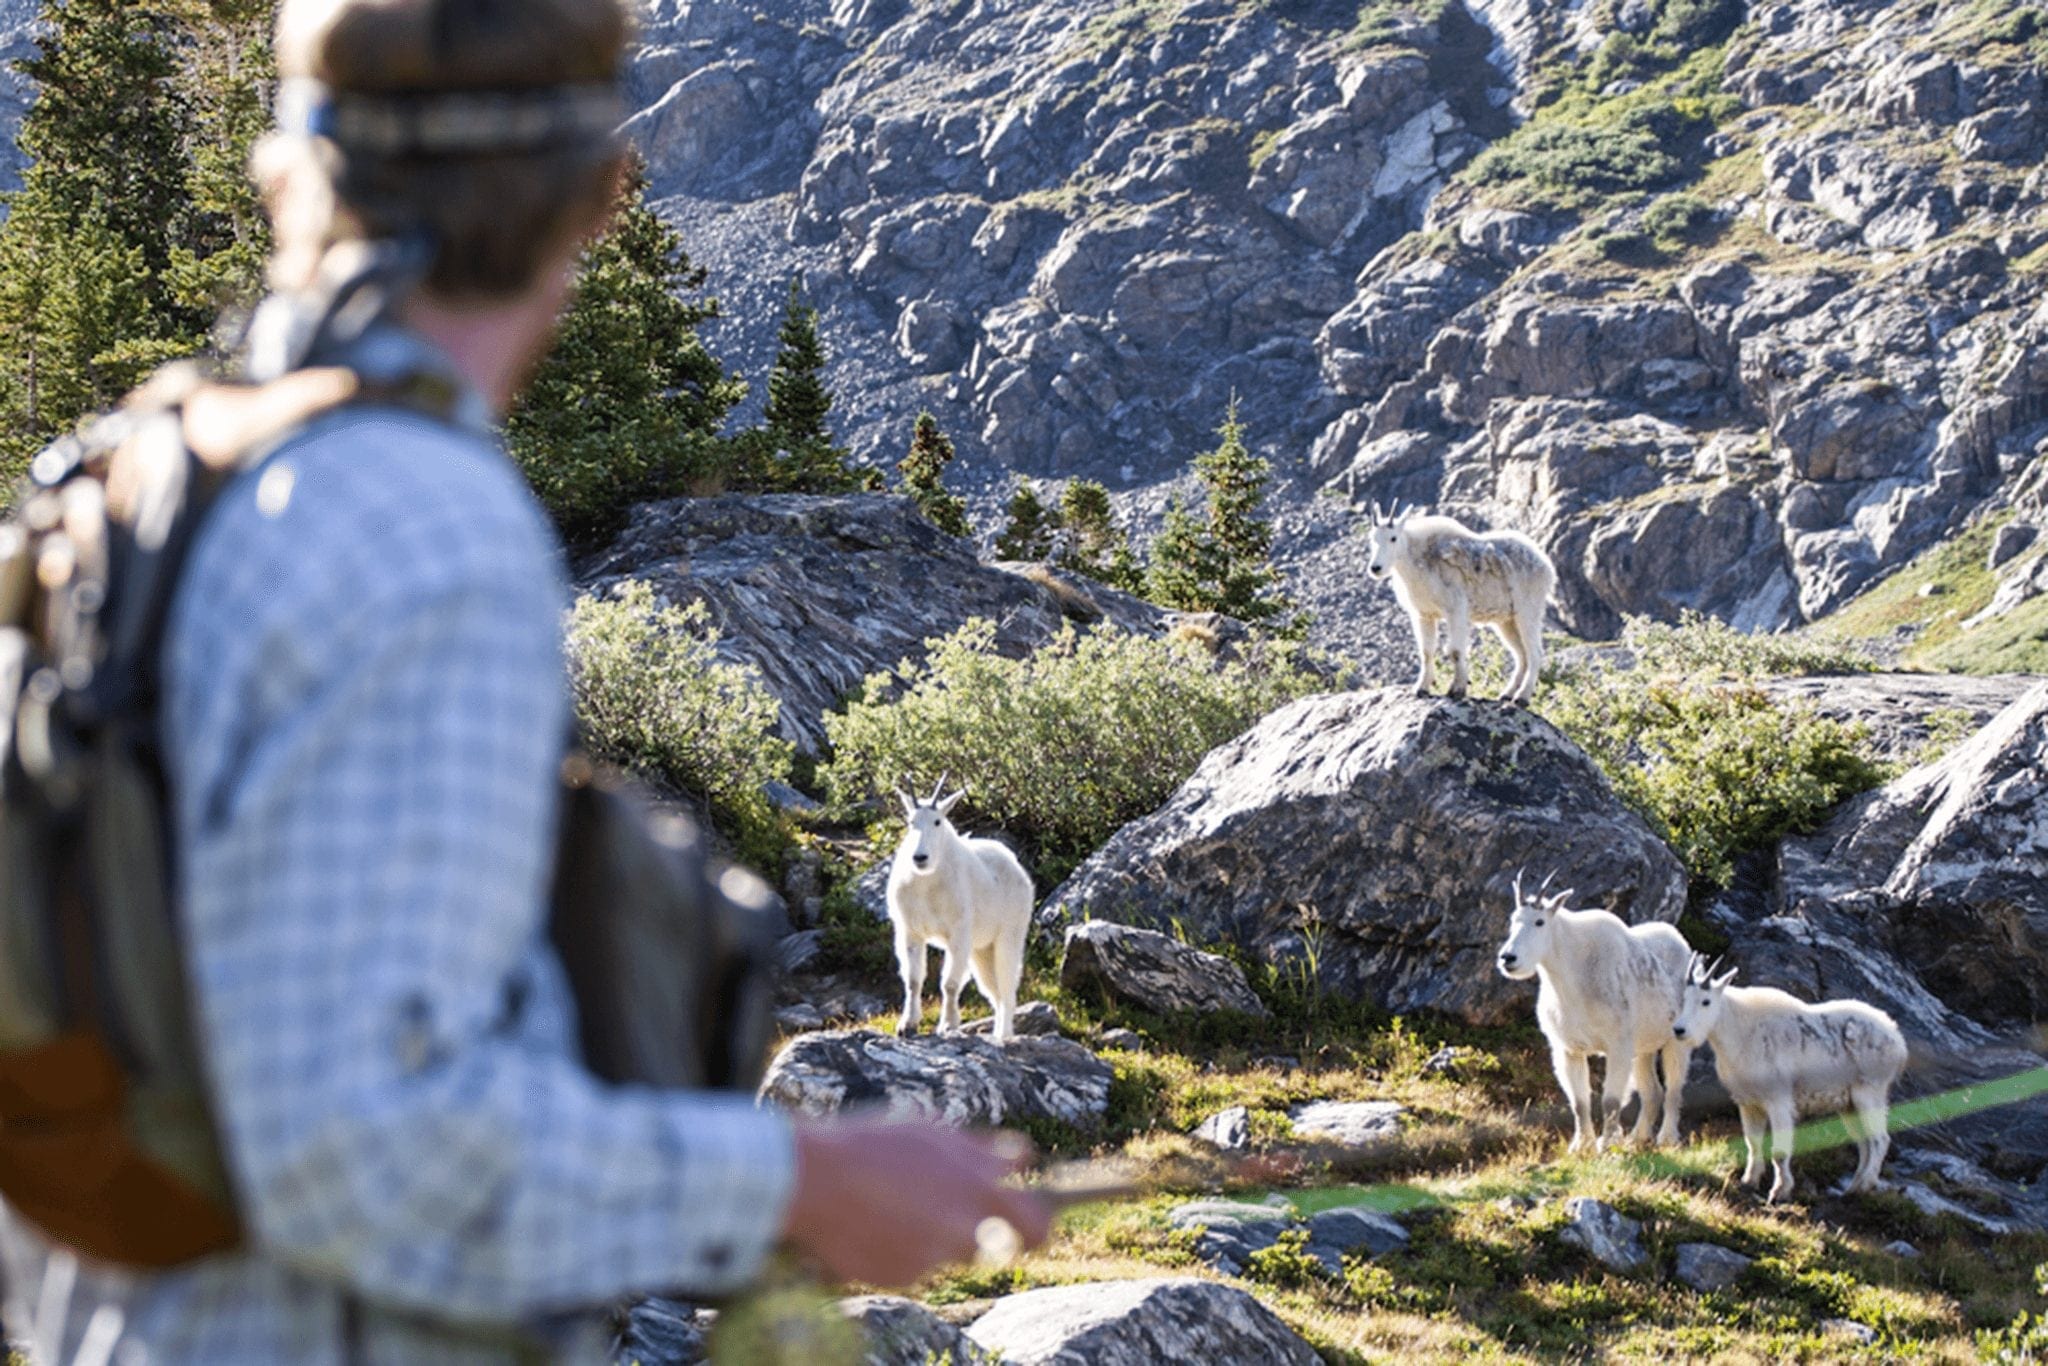 A fisherman looking at mountain goats while fly fishing.